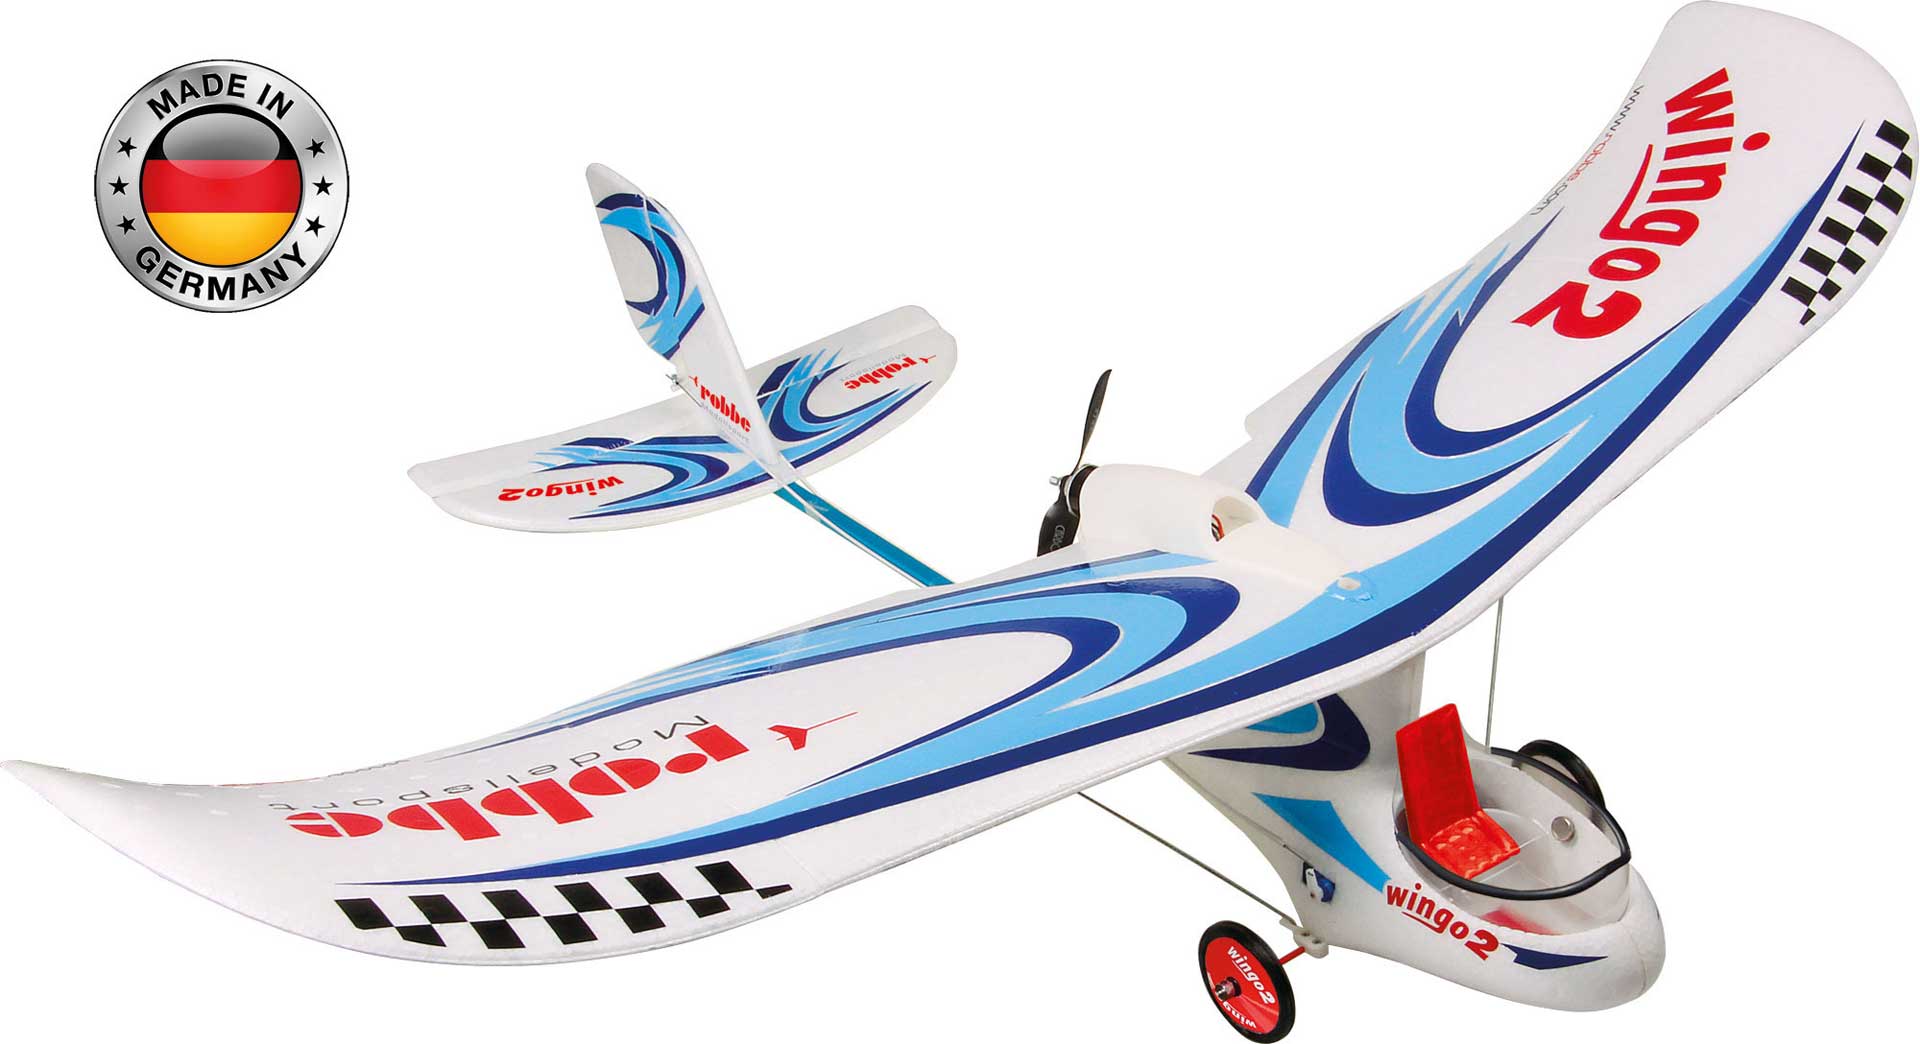 Robbe Modellsport WINGO 2 KIT "YOU CAN FLY" kit with Brushless motor, controller and servos, largely prefabricated